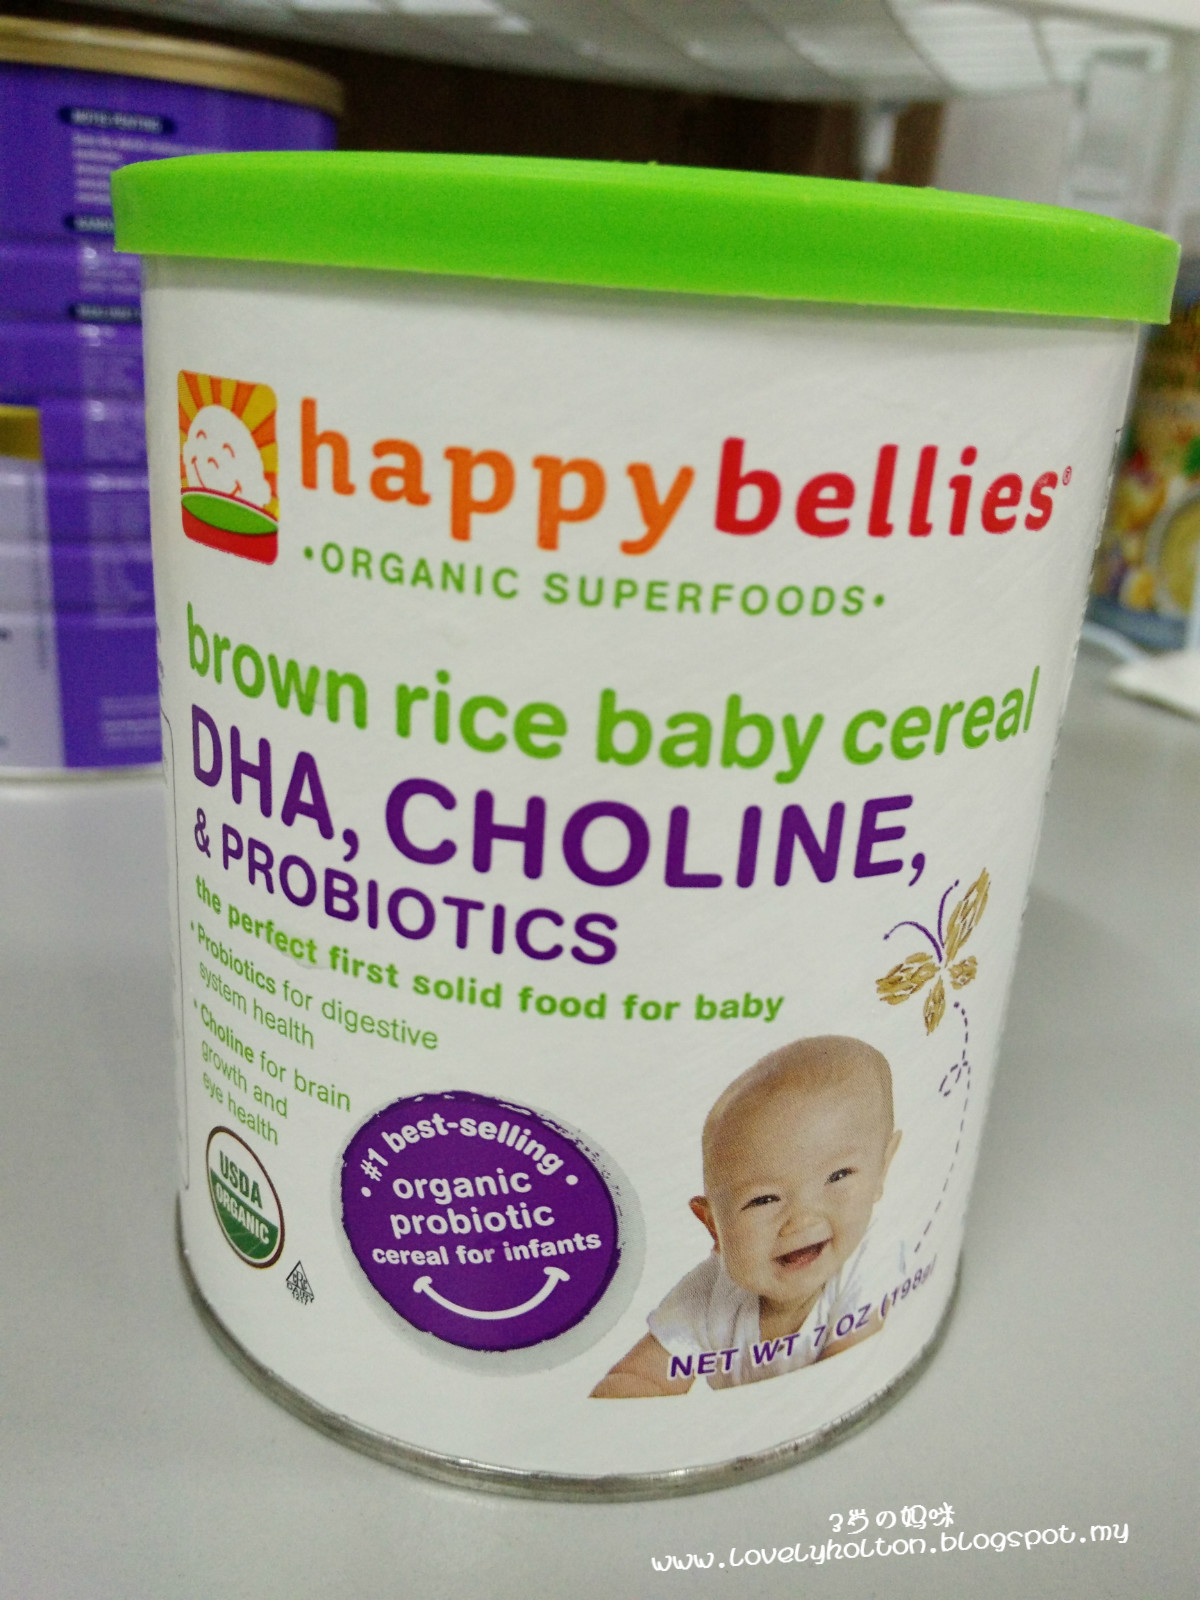 Happy Baby Brown Rice Cereal
 家 最重要的莫过于家 Happy Bellies Organic brown rice baby cereal